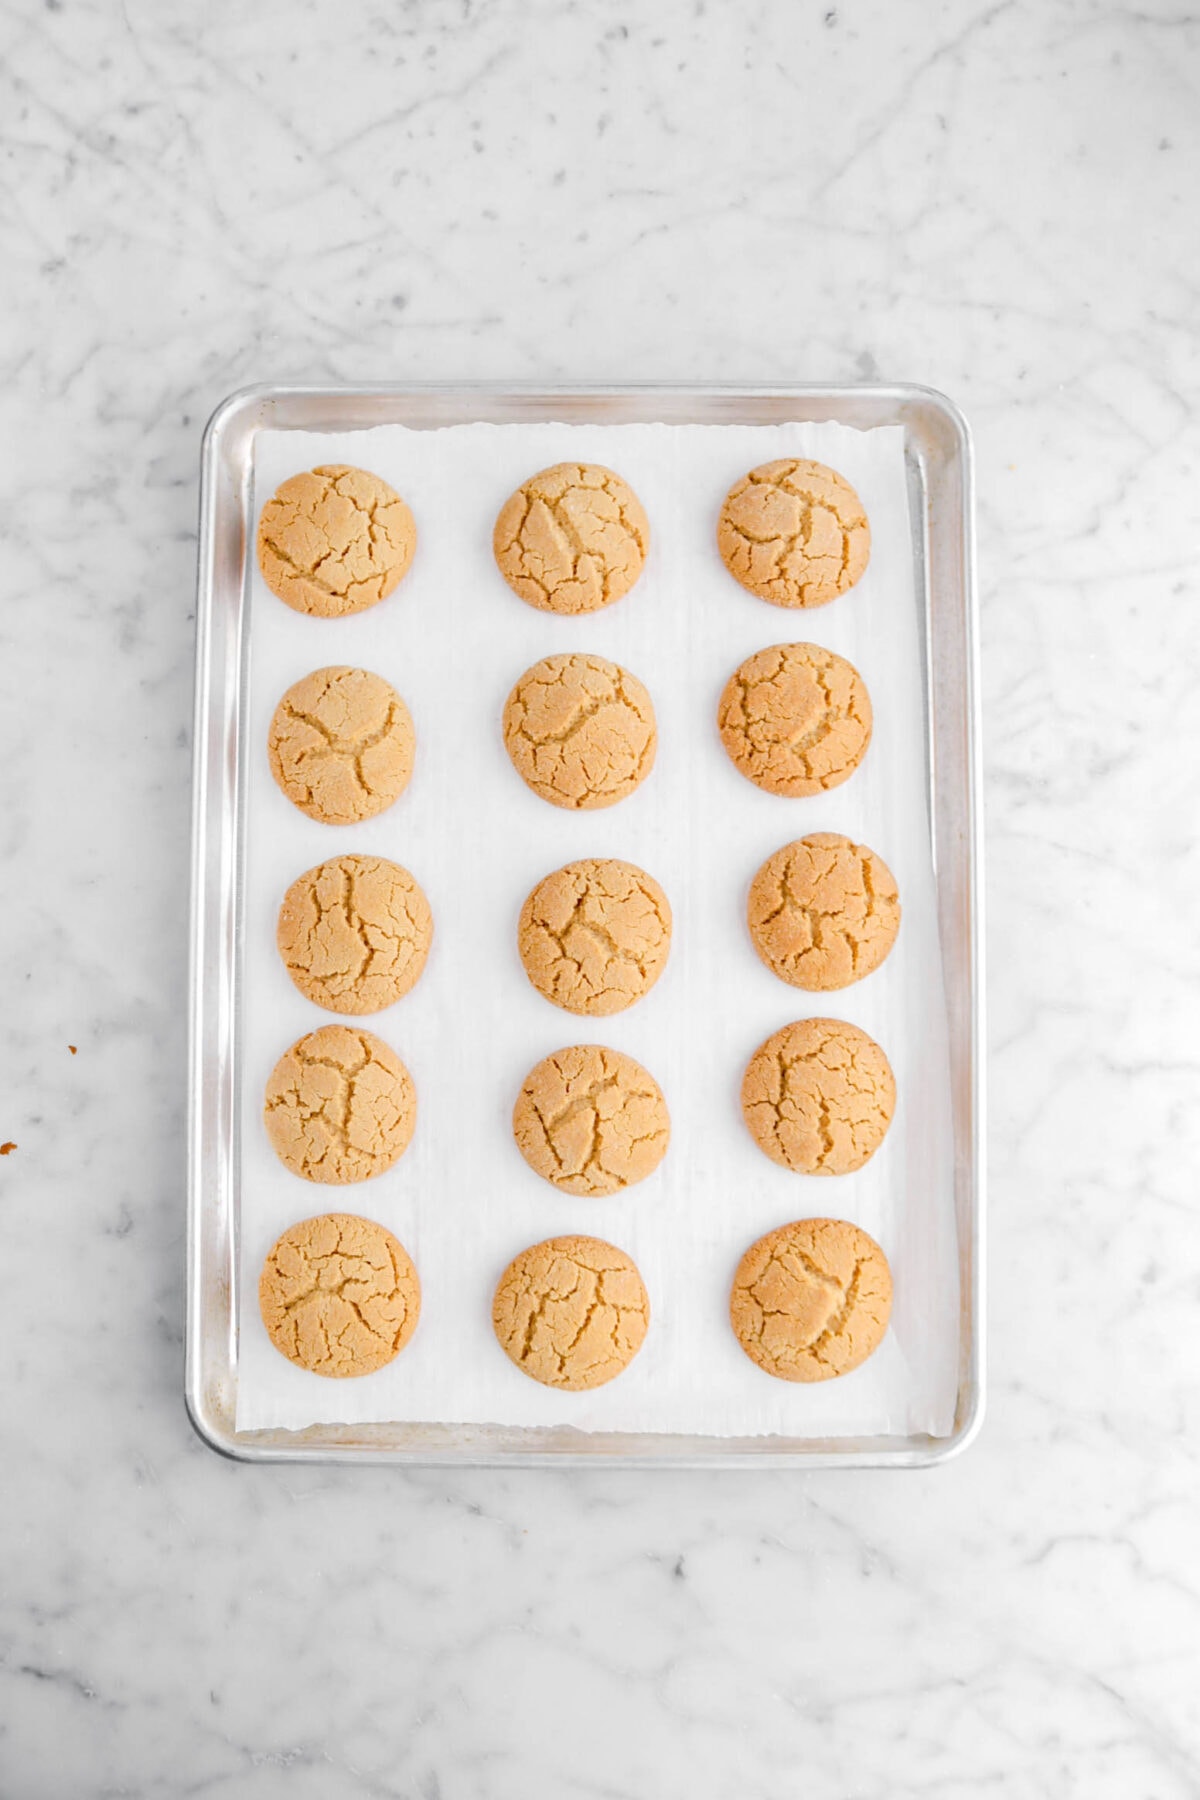 baked peanut butter cookies on lined sheet pan.